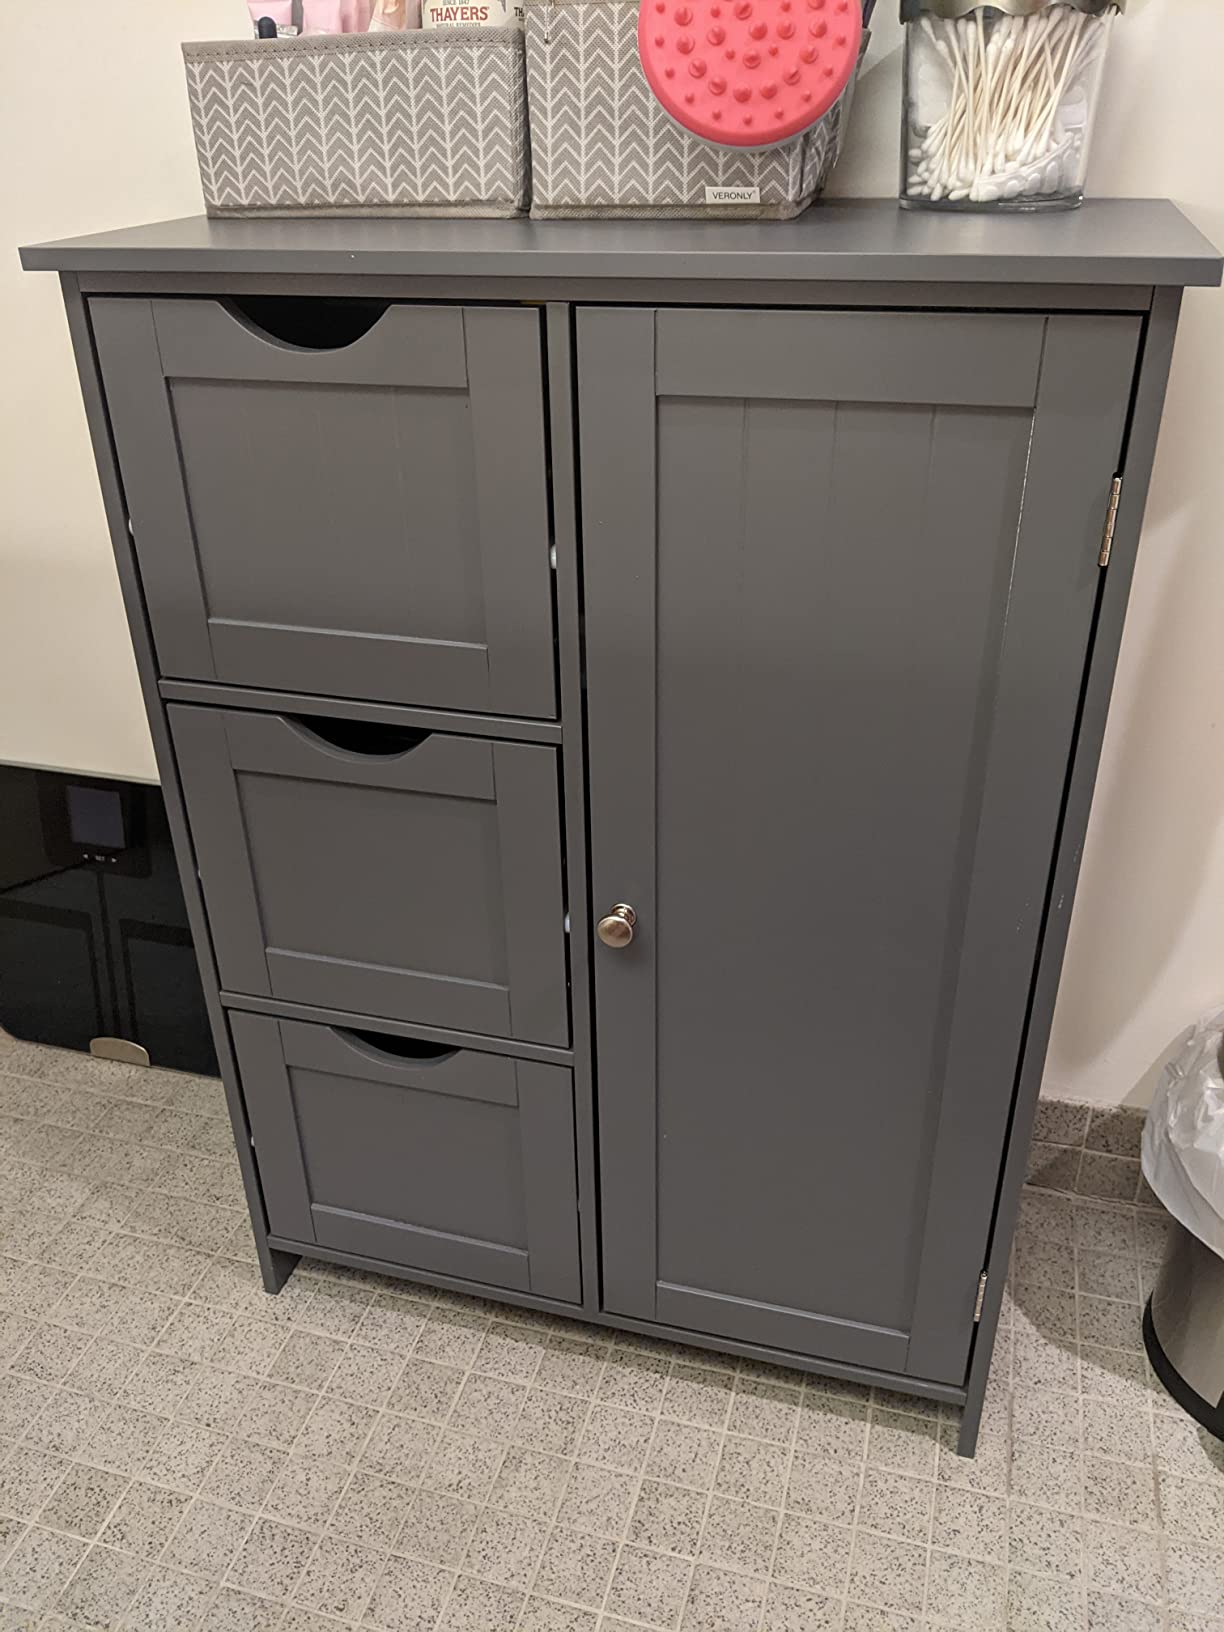 Bathroom Storage Cabinet, Floor Cabinet with 3 Large Drawers and 1 Adjustable Shelf, 23.6 x 11.8 x 31.9 Inches - HWLEXTRA 